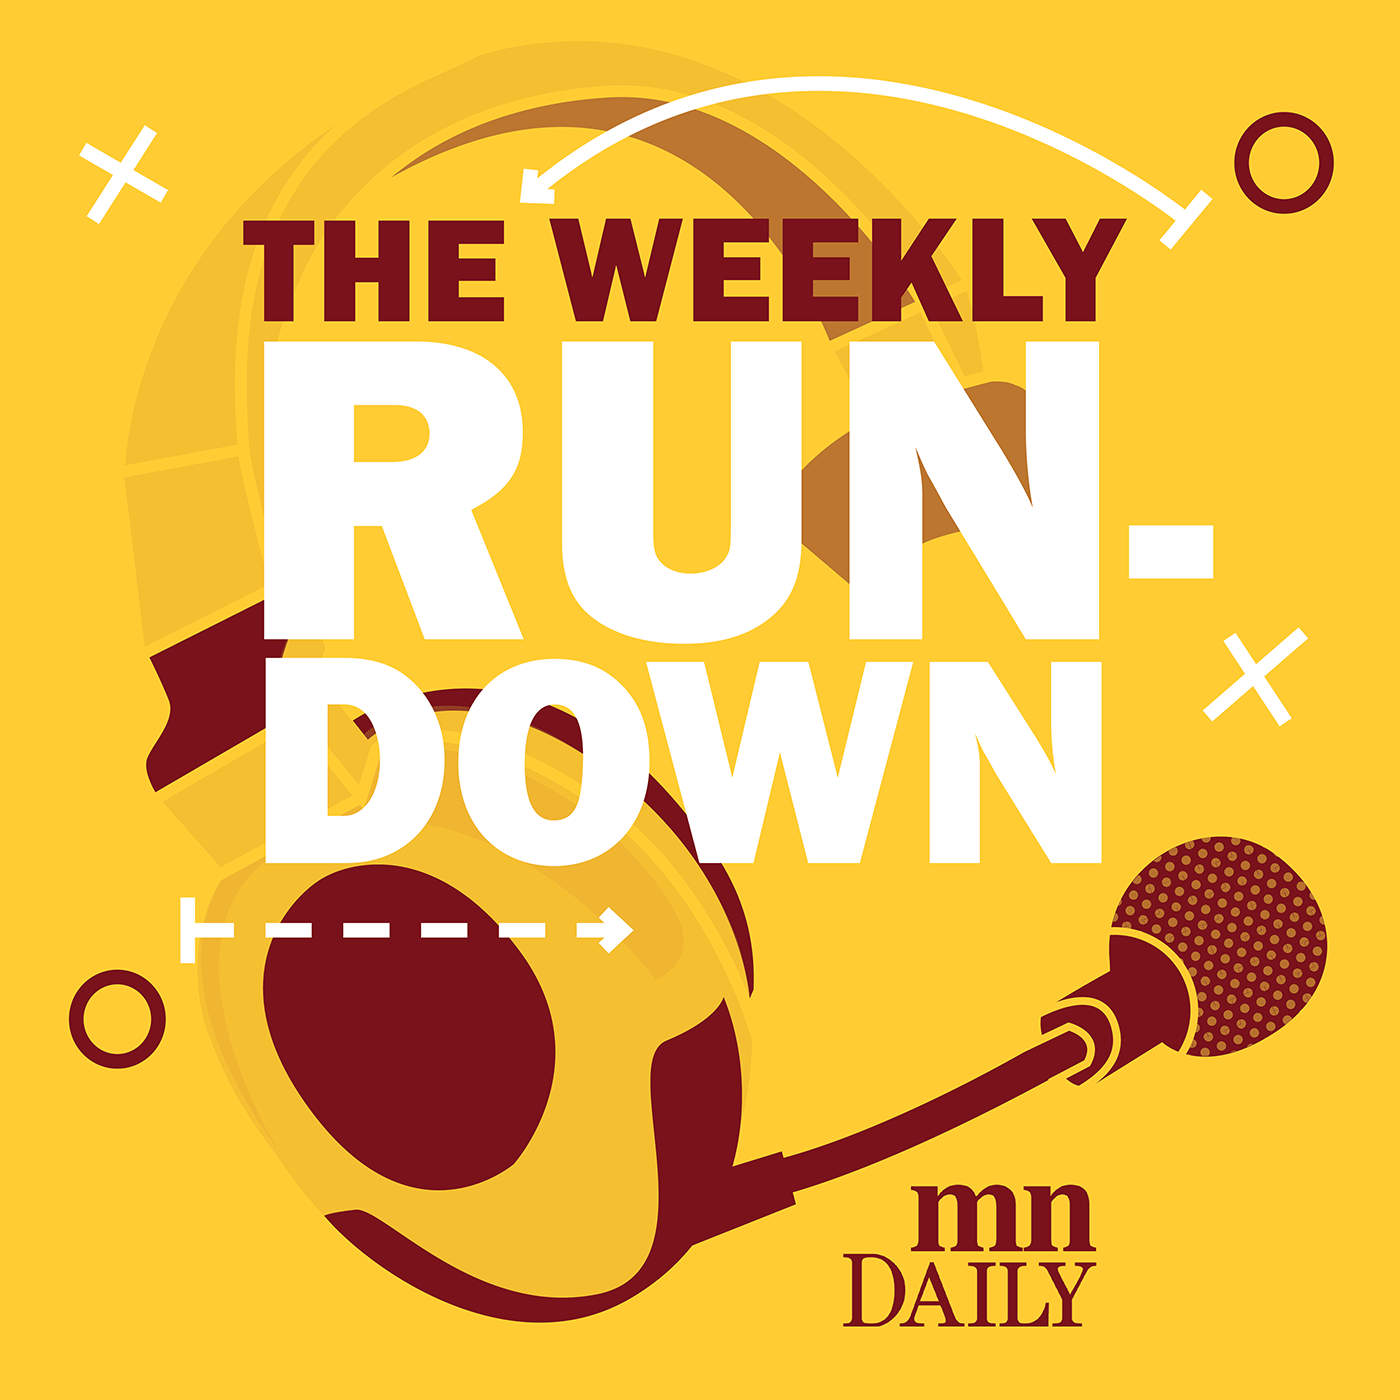 MN Daily Sports: The Weekly Run-Down